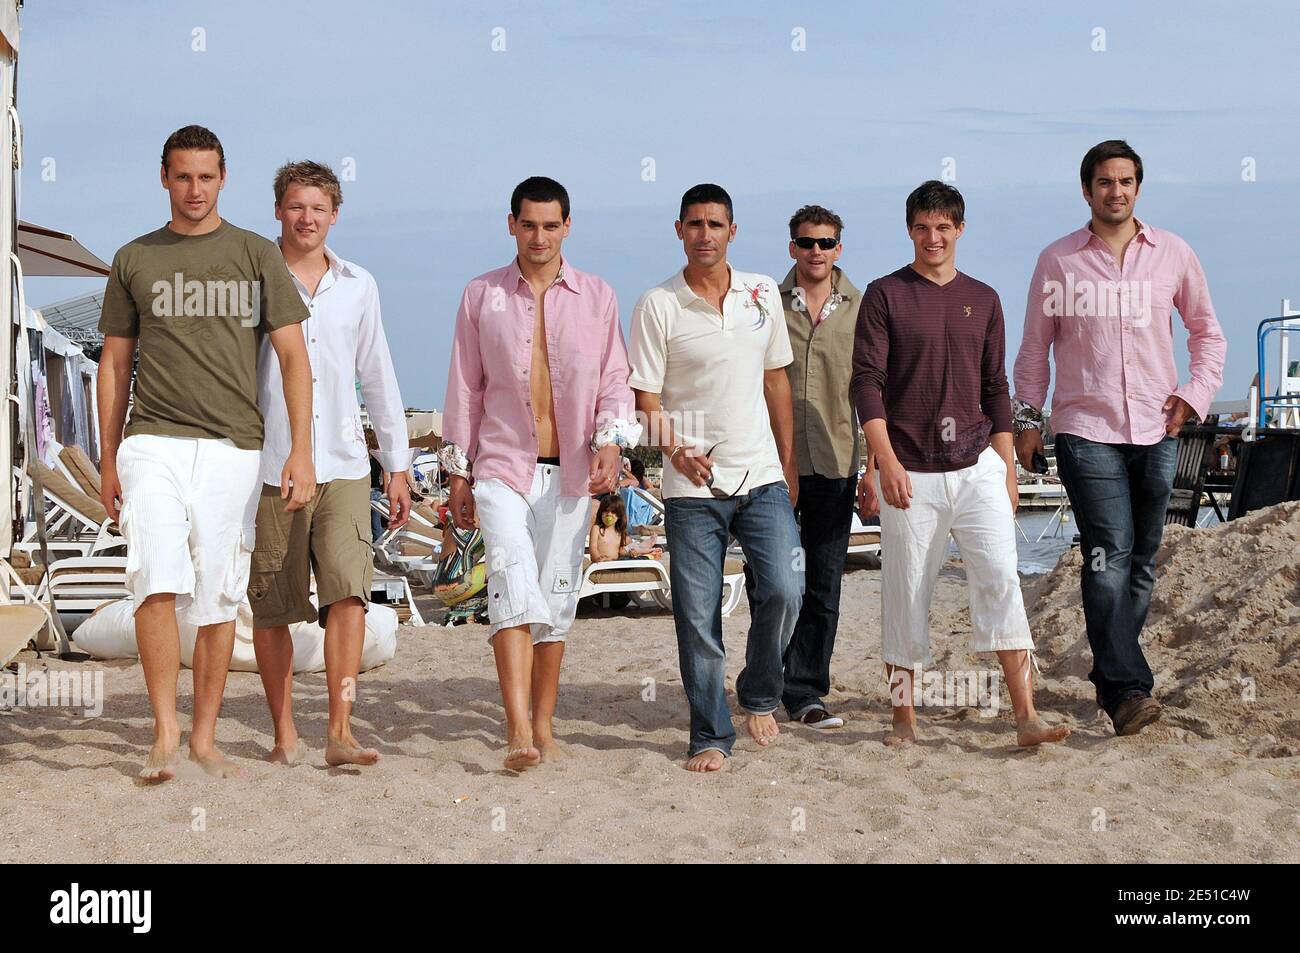 French Coach and former swimmer Franck Esposito presents his new outfits collection on the beach Miramar on 'La Croisette' in Cannes, France on May 12, 2008. Photo by Capbern/Cameleon/ABACAPRESS.COM Stock Photo